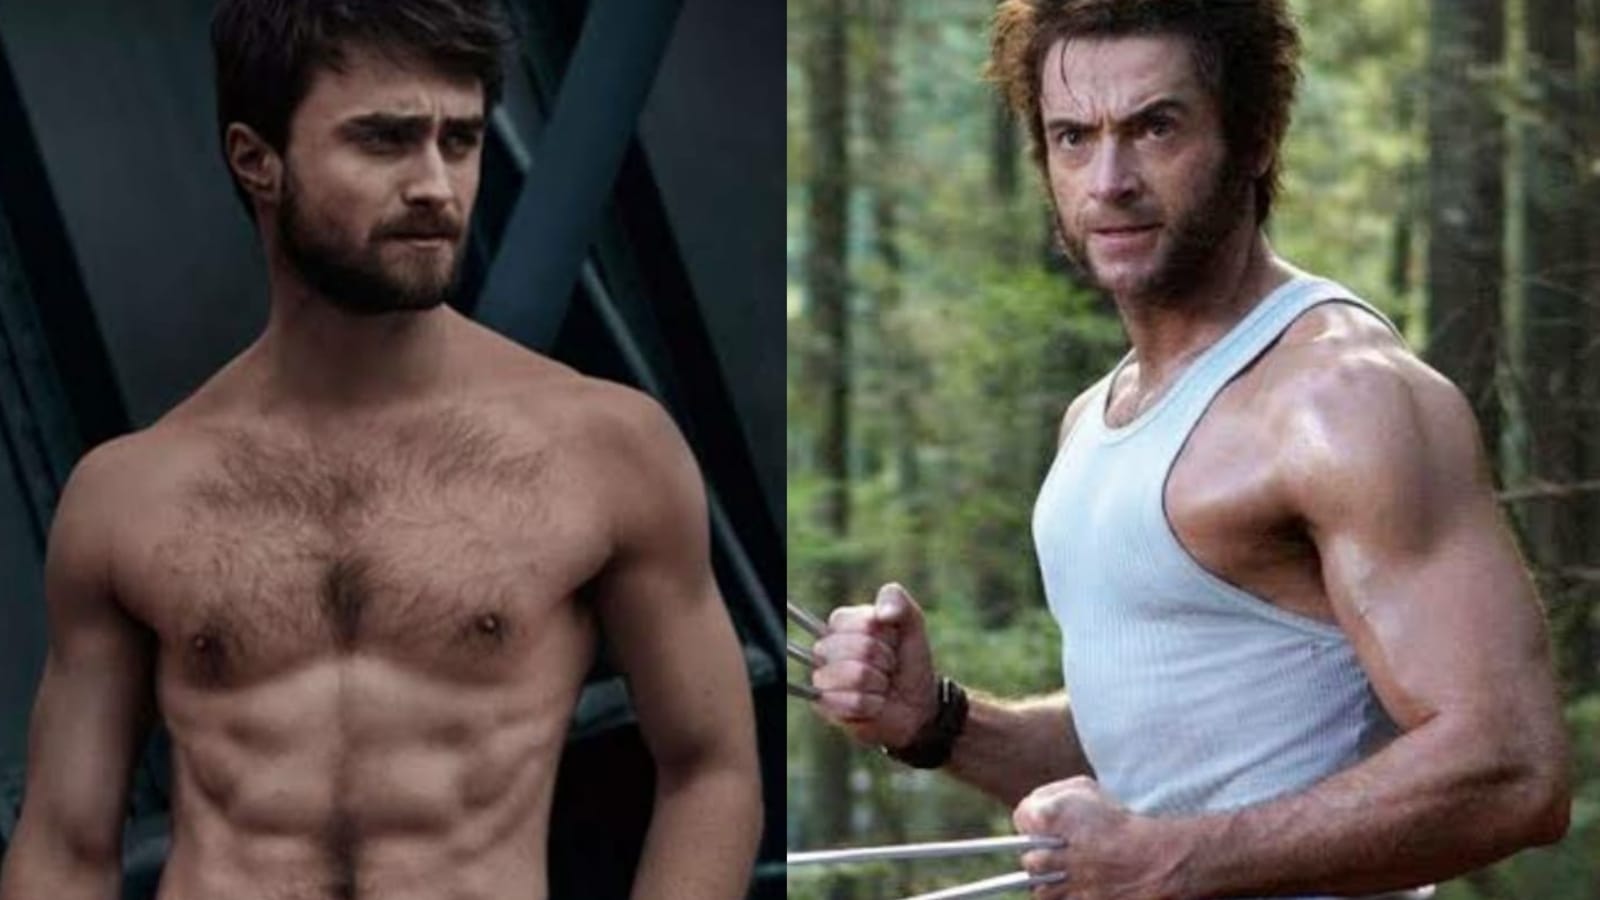 Doctor Strange 2: Daniel Radcliffe reacts to rumours of him playing Wolverine in film, says ‘Who knows’